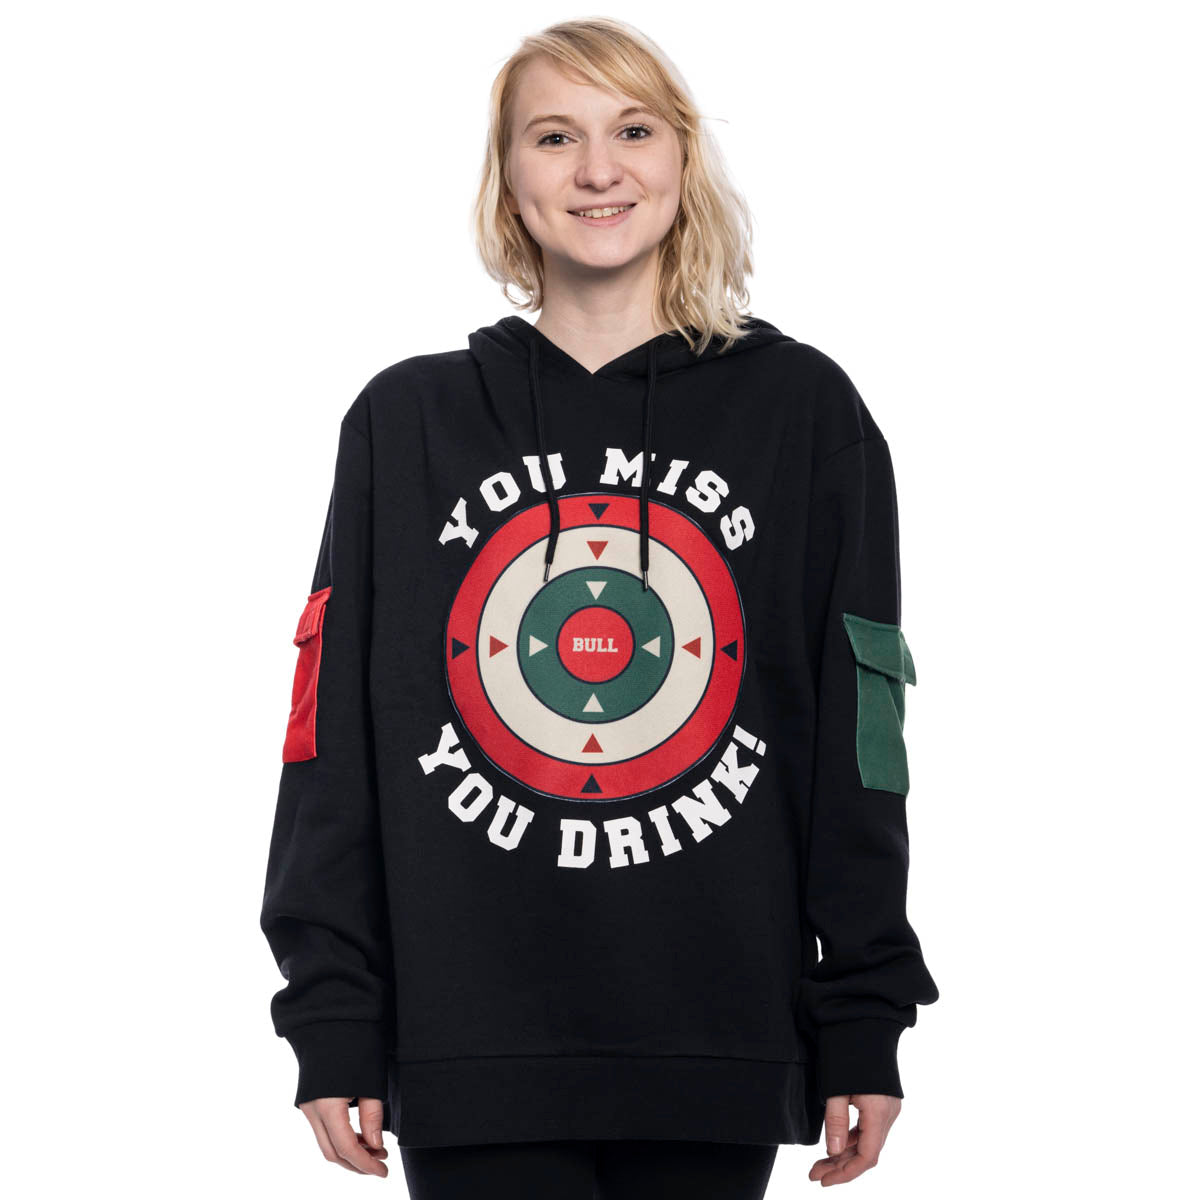 Dart Board Costume Hoodie You Miss You Drink Front look